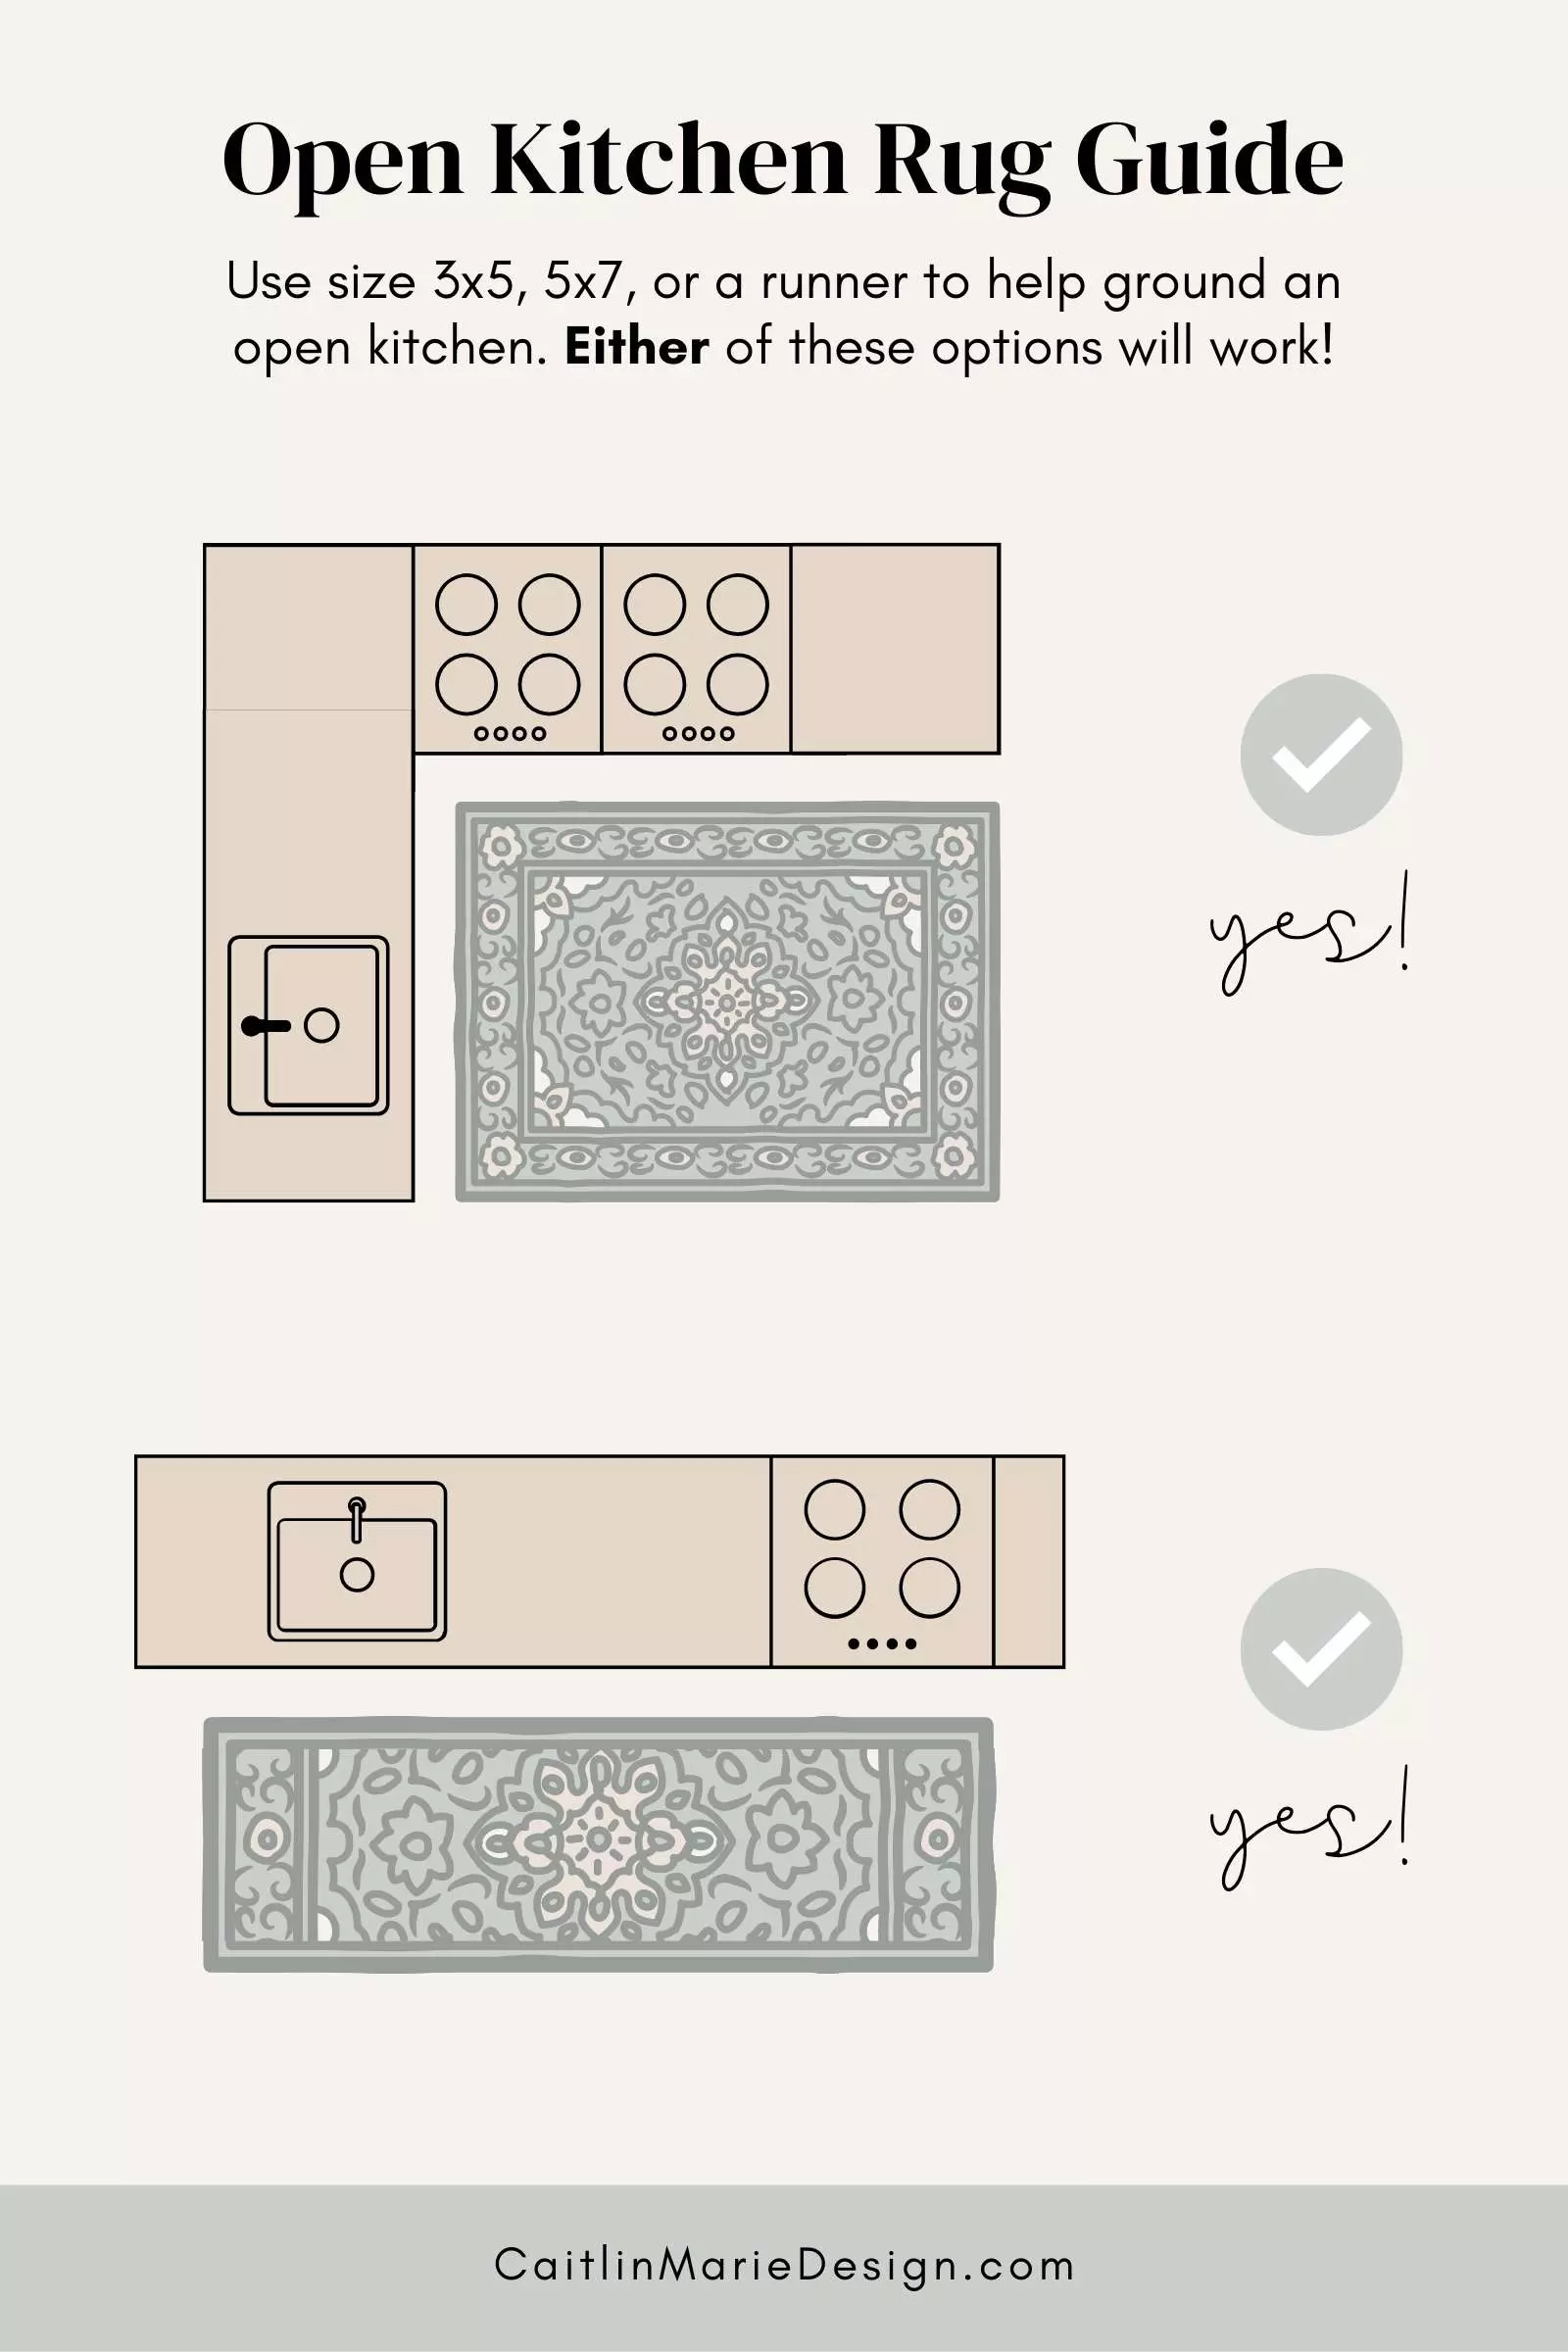 Open Kitchen Rug Size Guide for No Island: Use size 3x5, 5x7, or a runner to help ground an open kitchen.